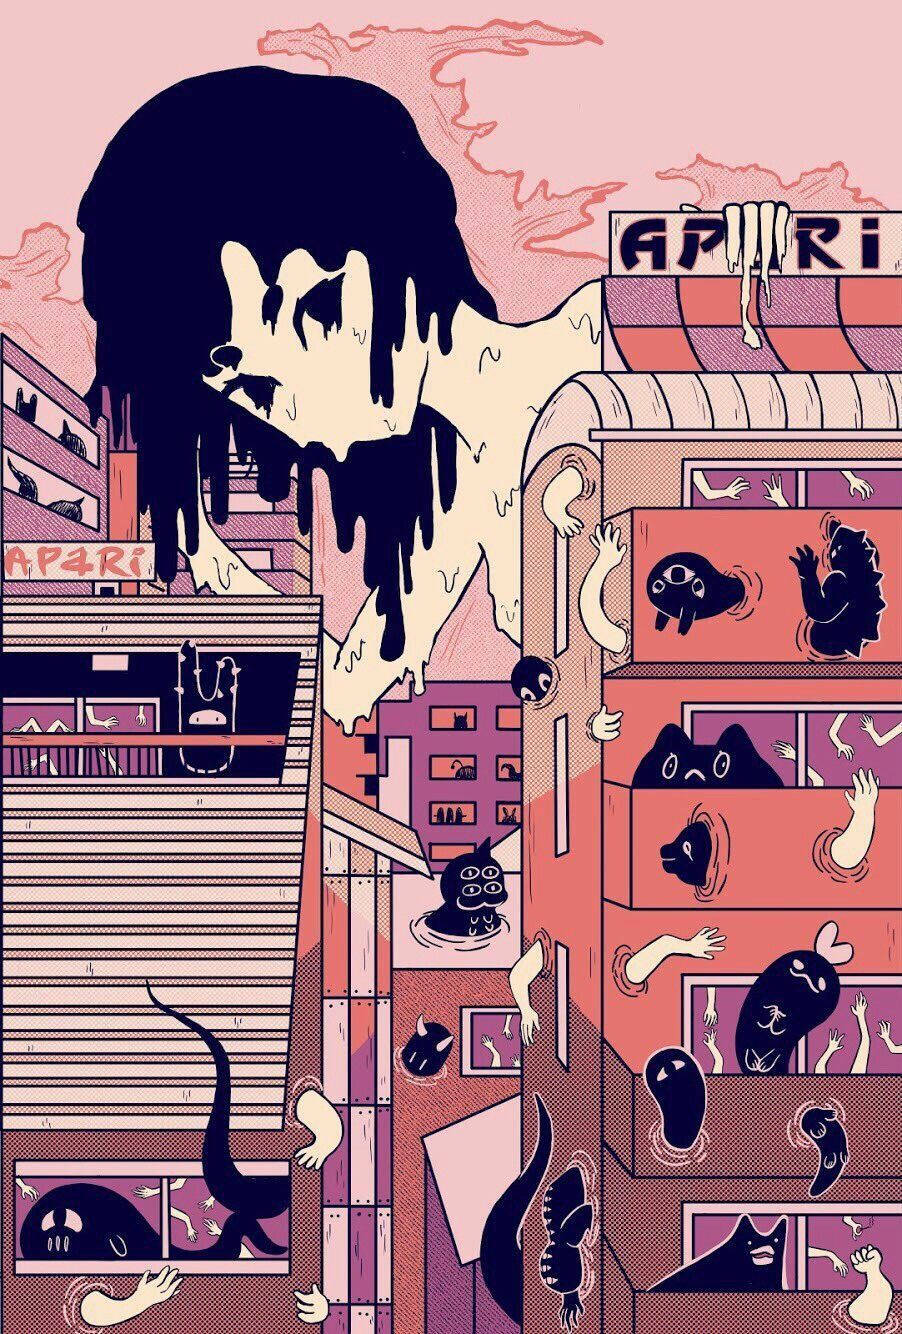 Monsters In The City Retro Anime Aesthetic